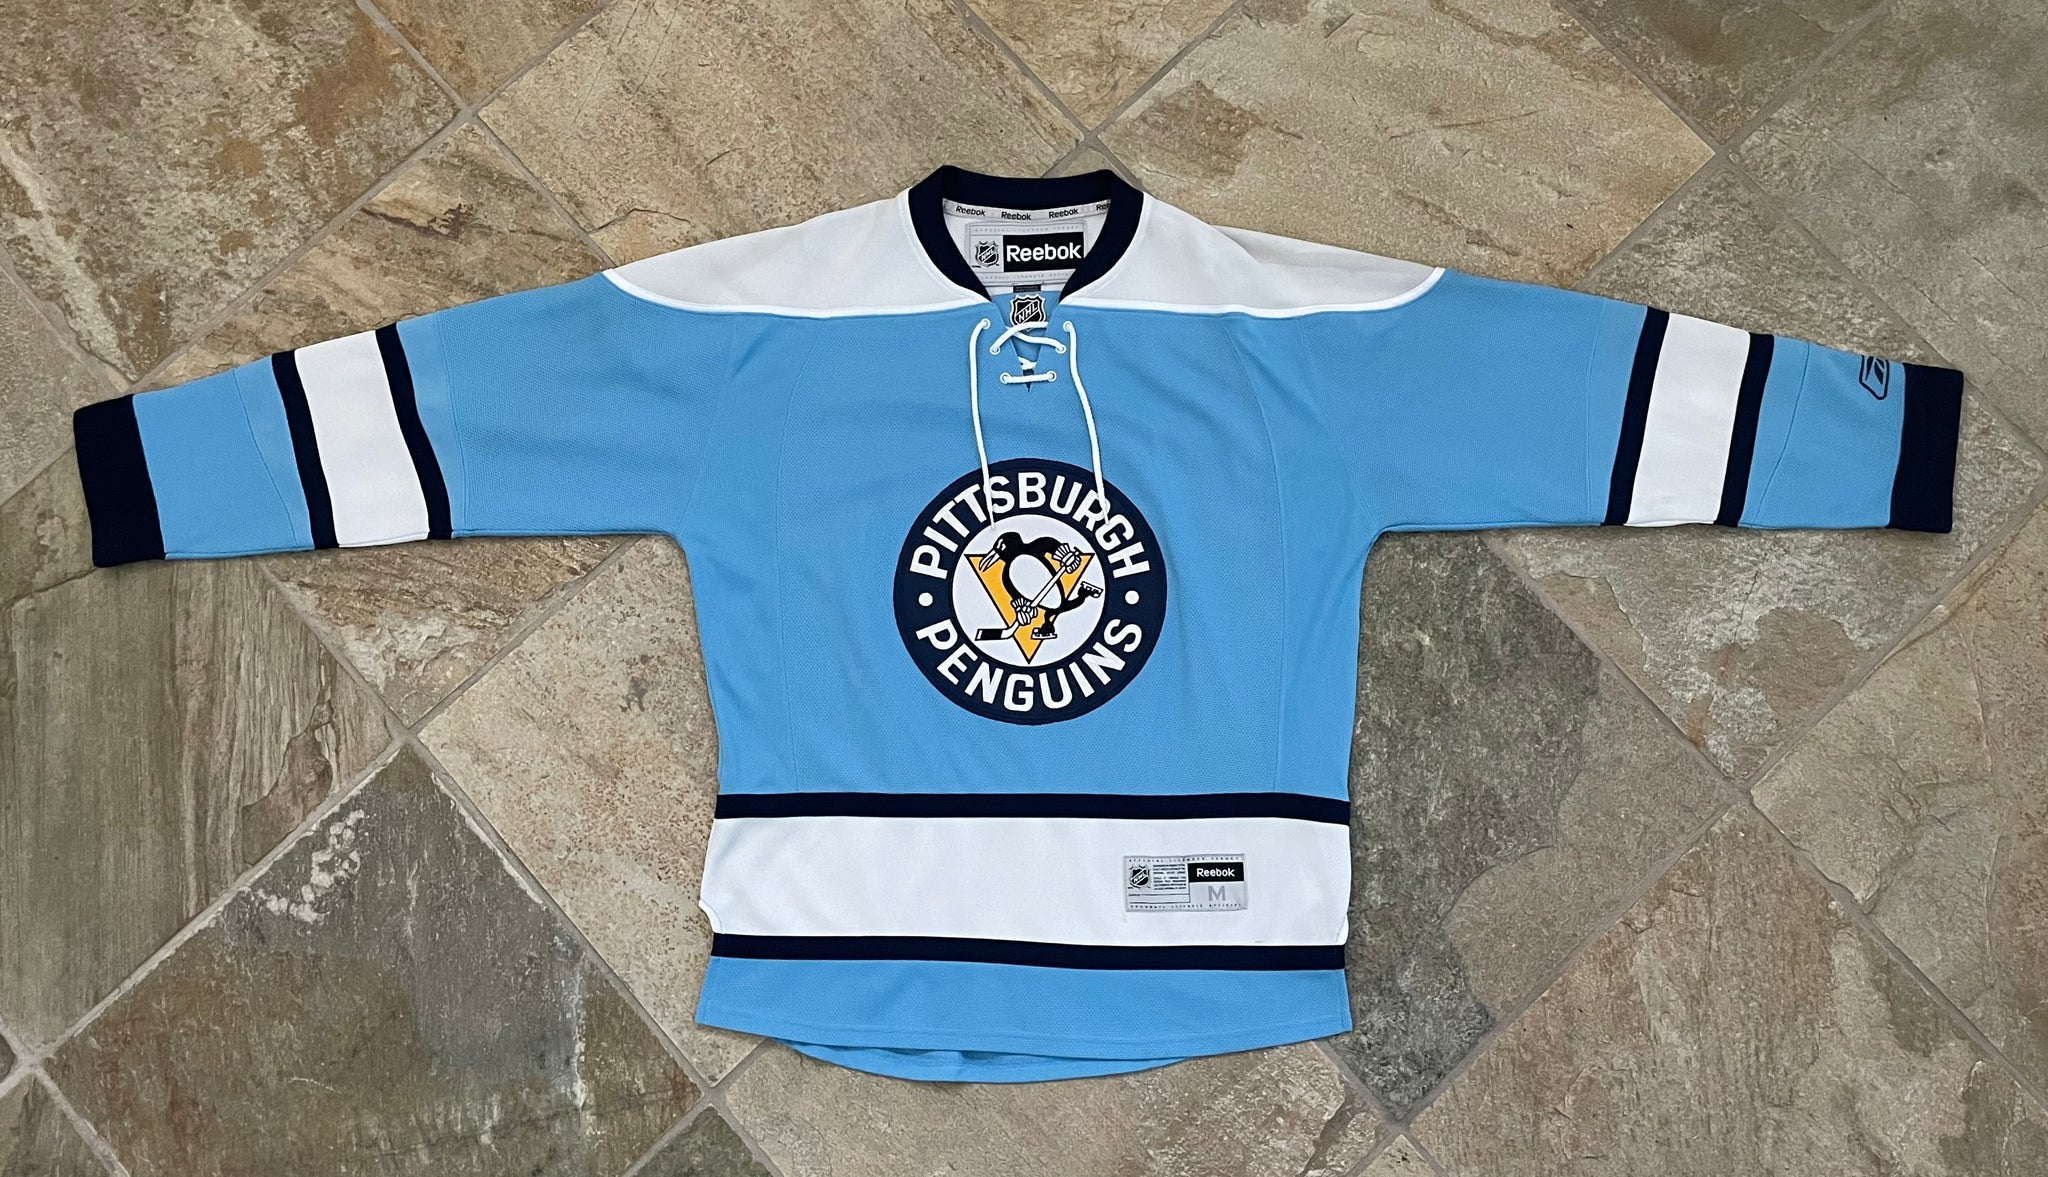 How to get NHL Winter Classic Pittsburgh Penguins jerseys, gear